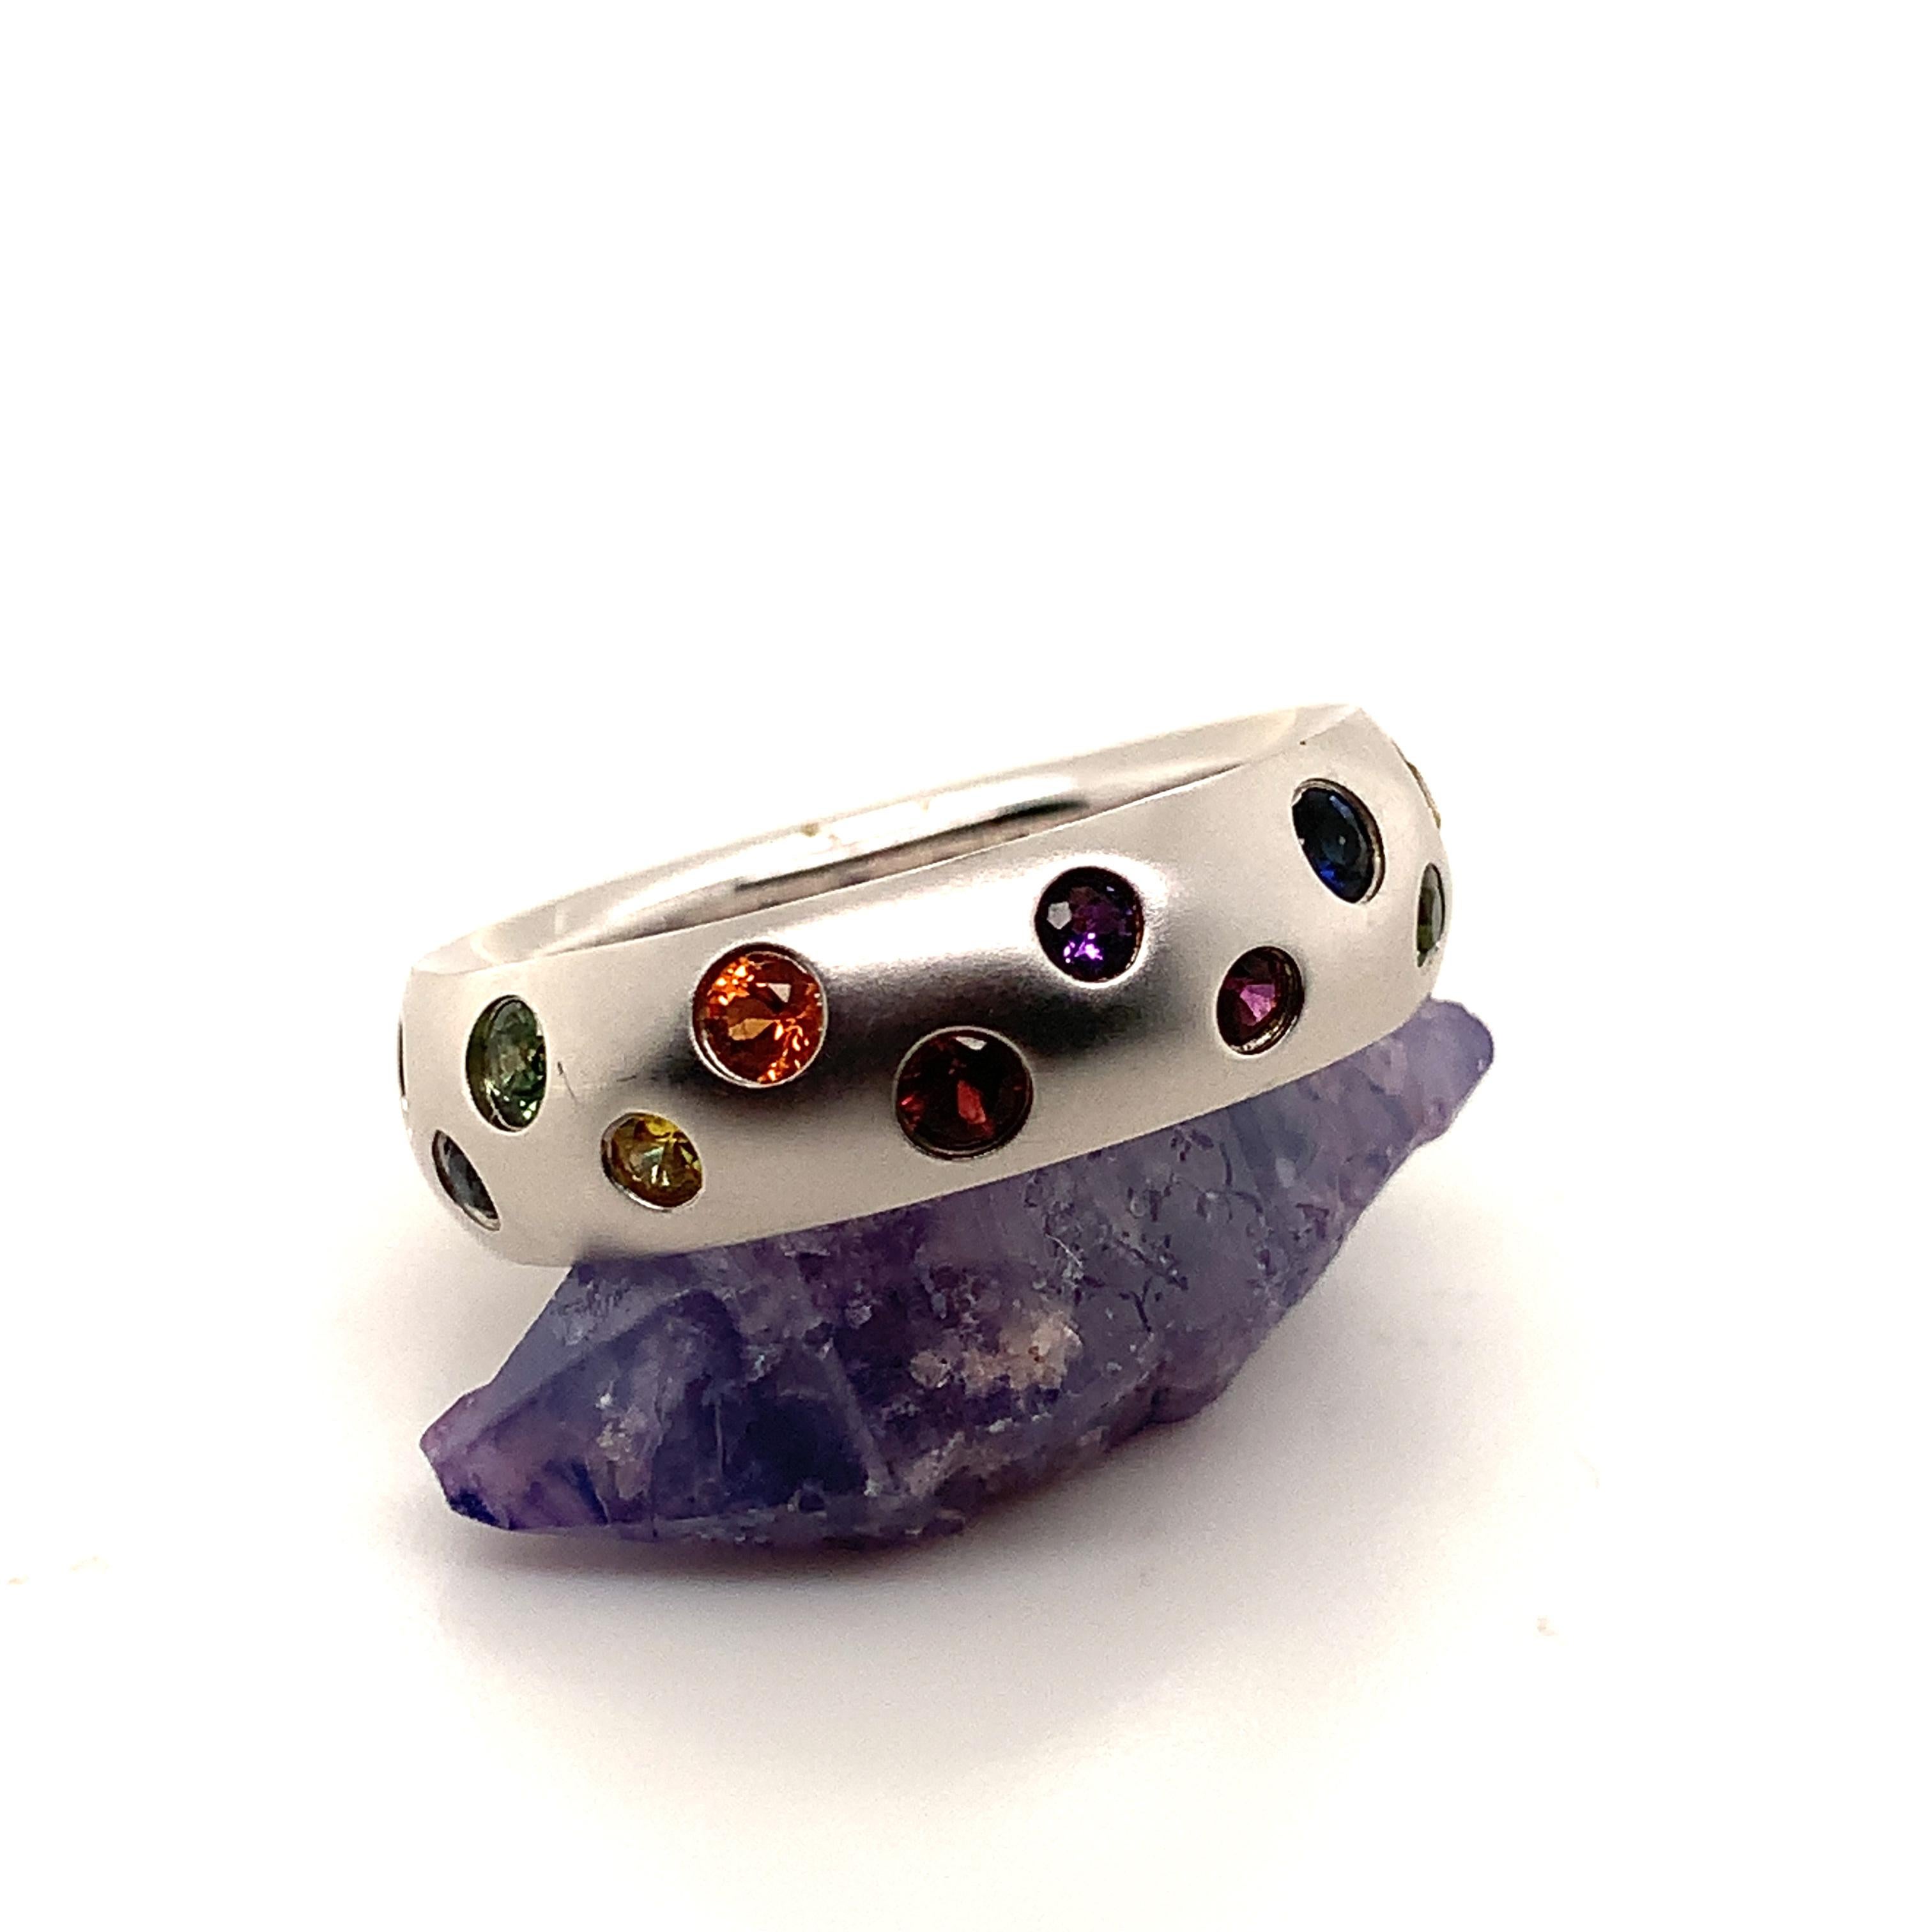 Brilliant Cut 18 Karat White Gold Ring with 15 Multi-Color Sapphires For Sale